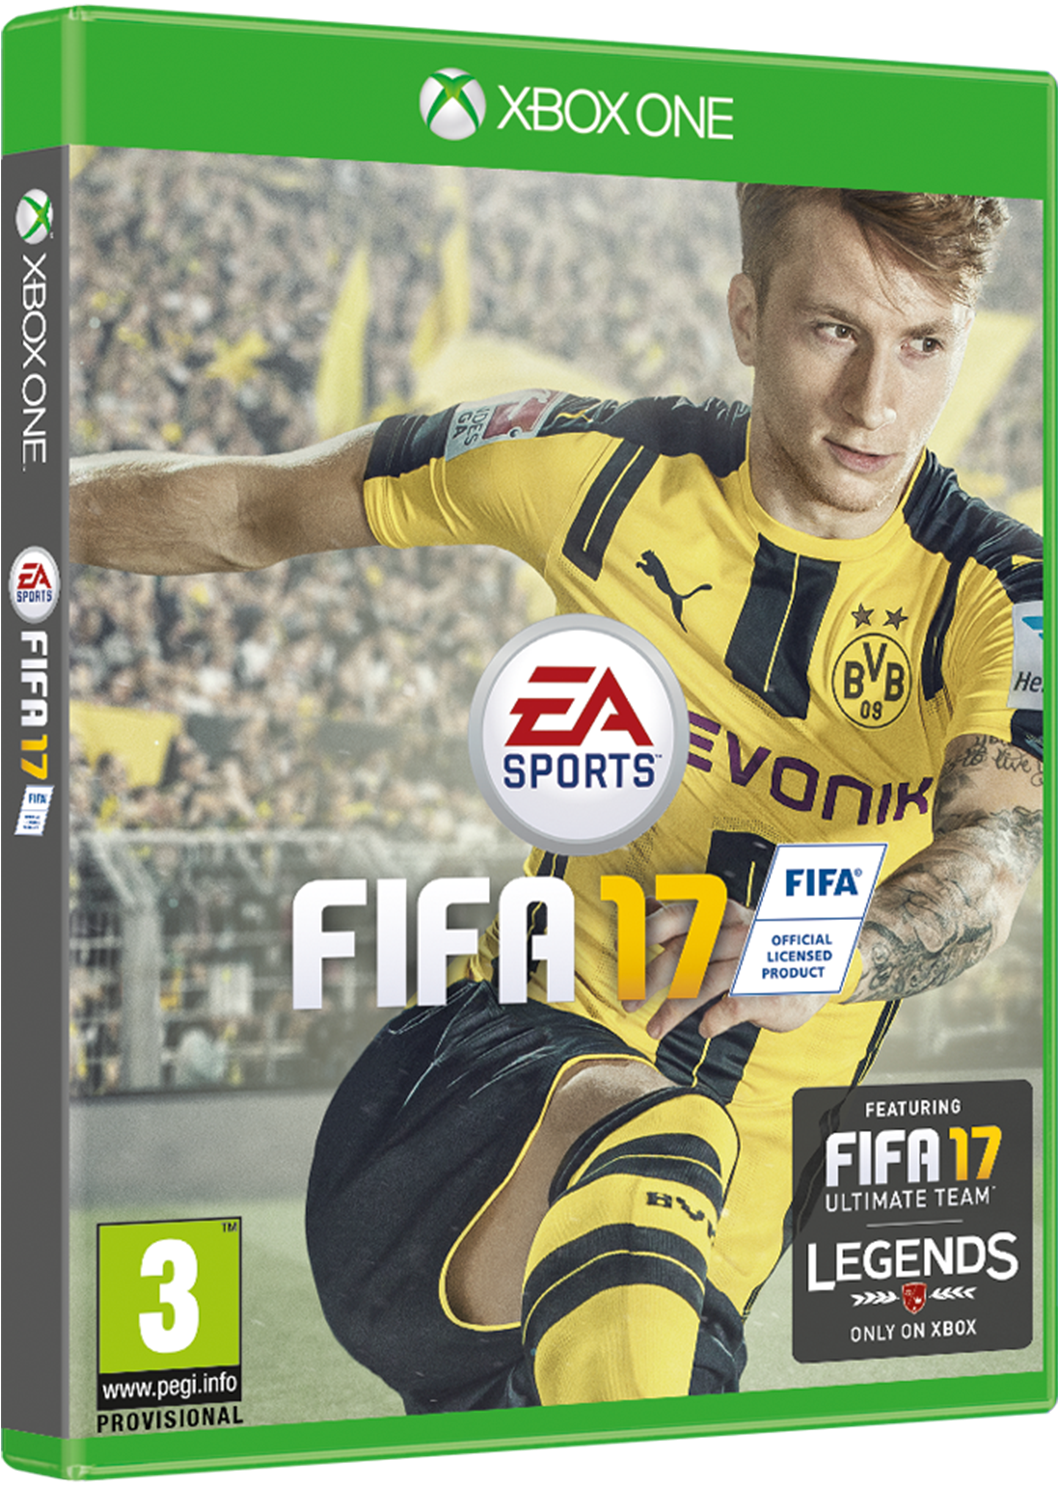 View Larger Image - Fifa 17 Xbox One Review (2757x1727), Png Download